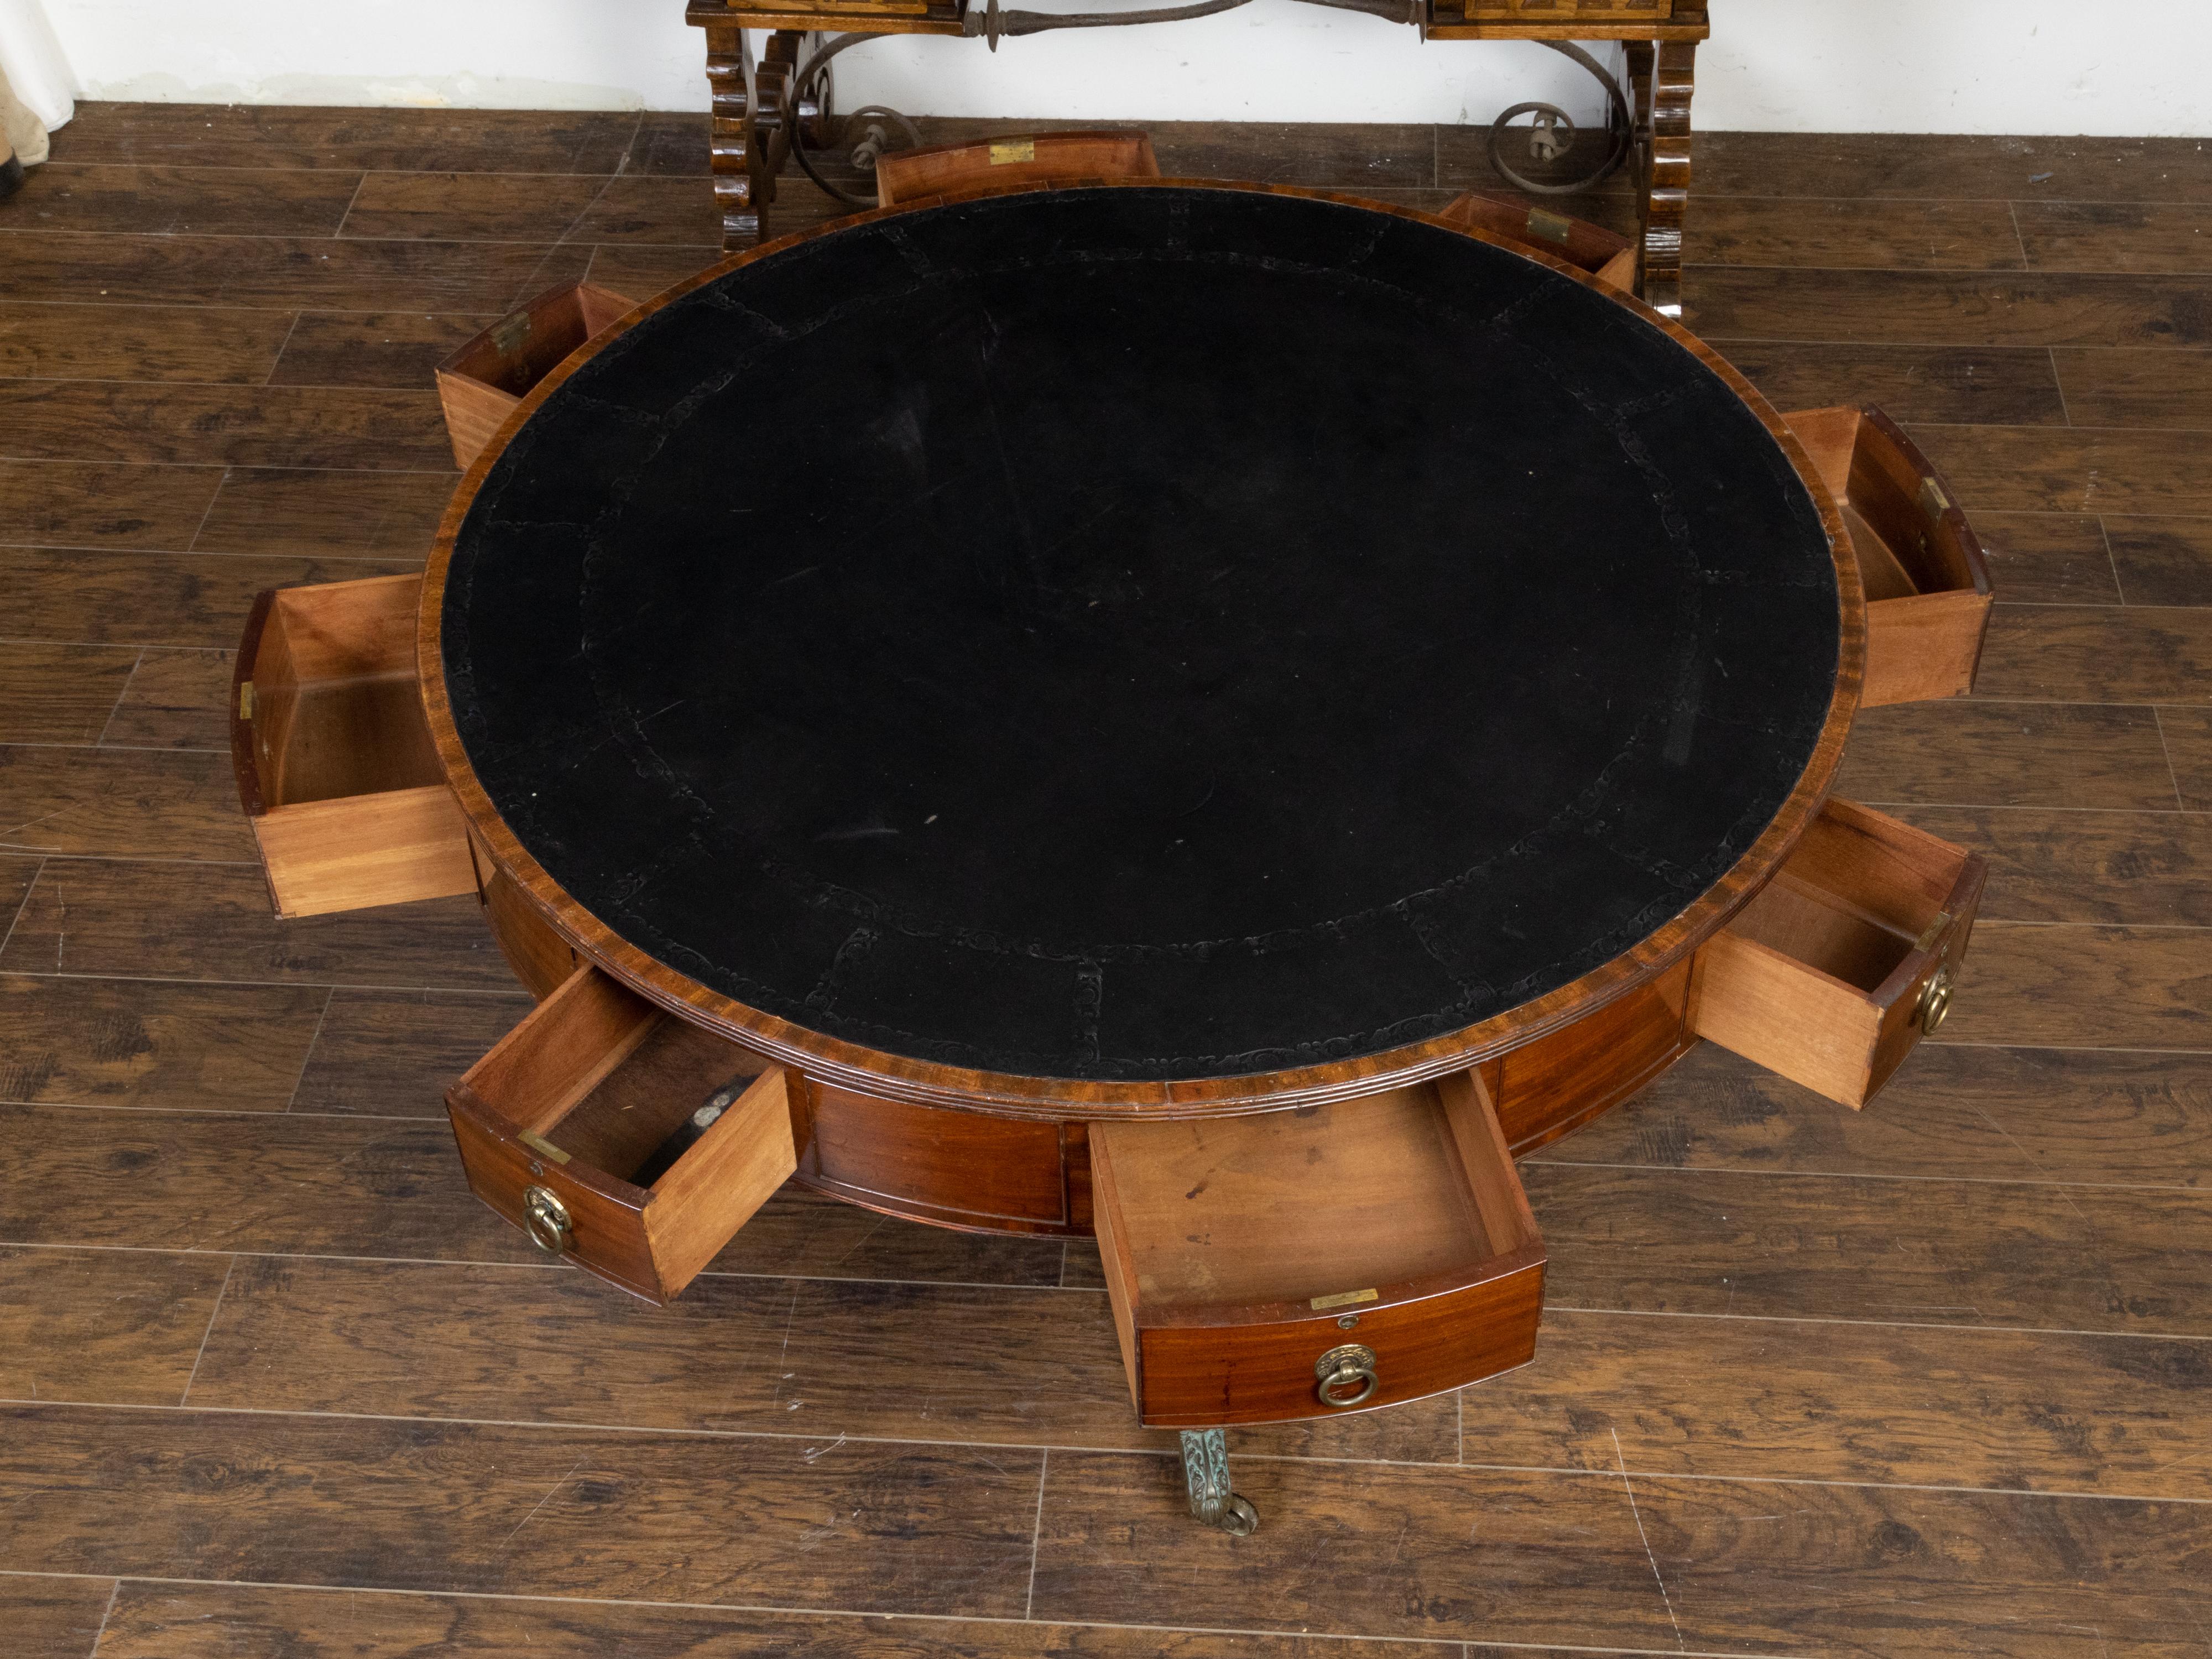 English Regency 1840s Mahogany Rent Table with Leather Top and Eight Drawers For Sale 3